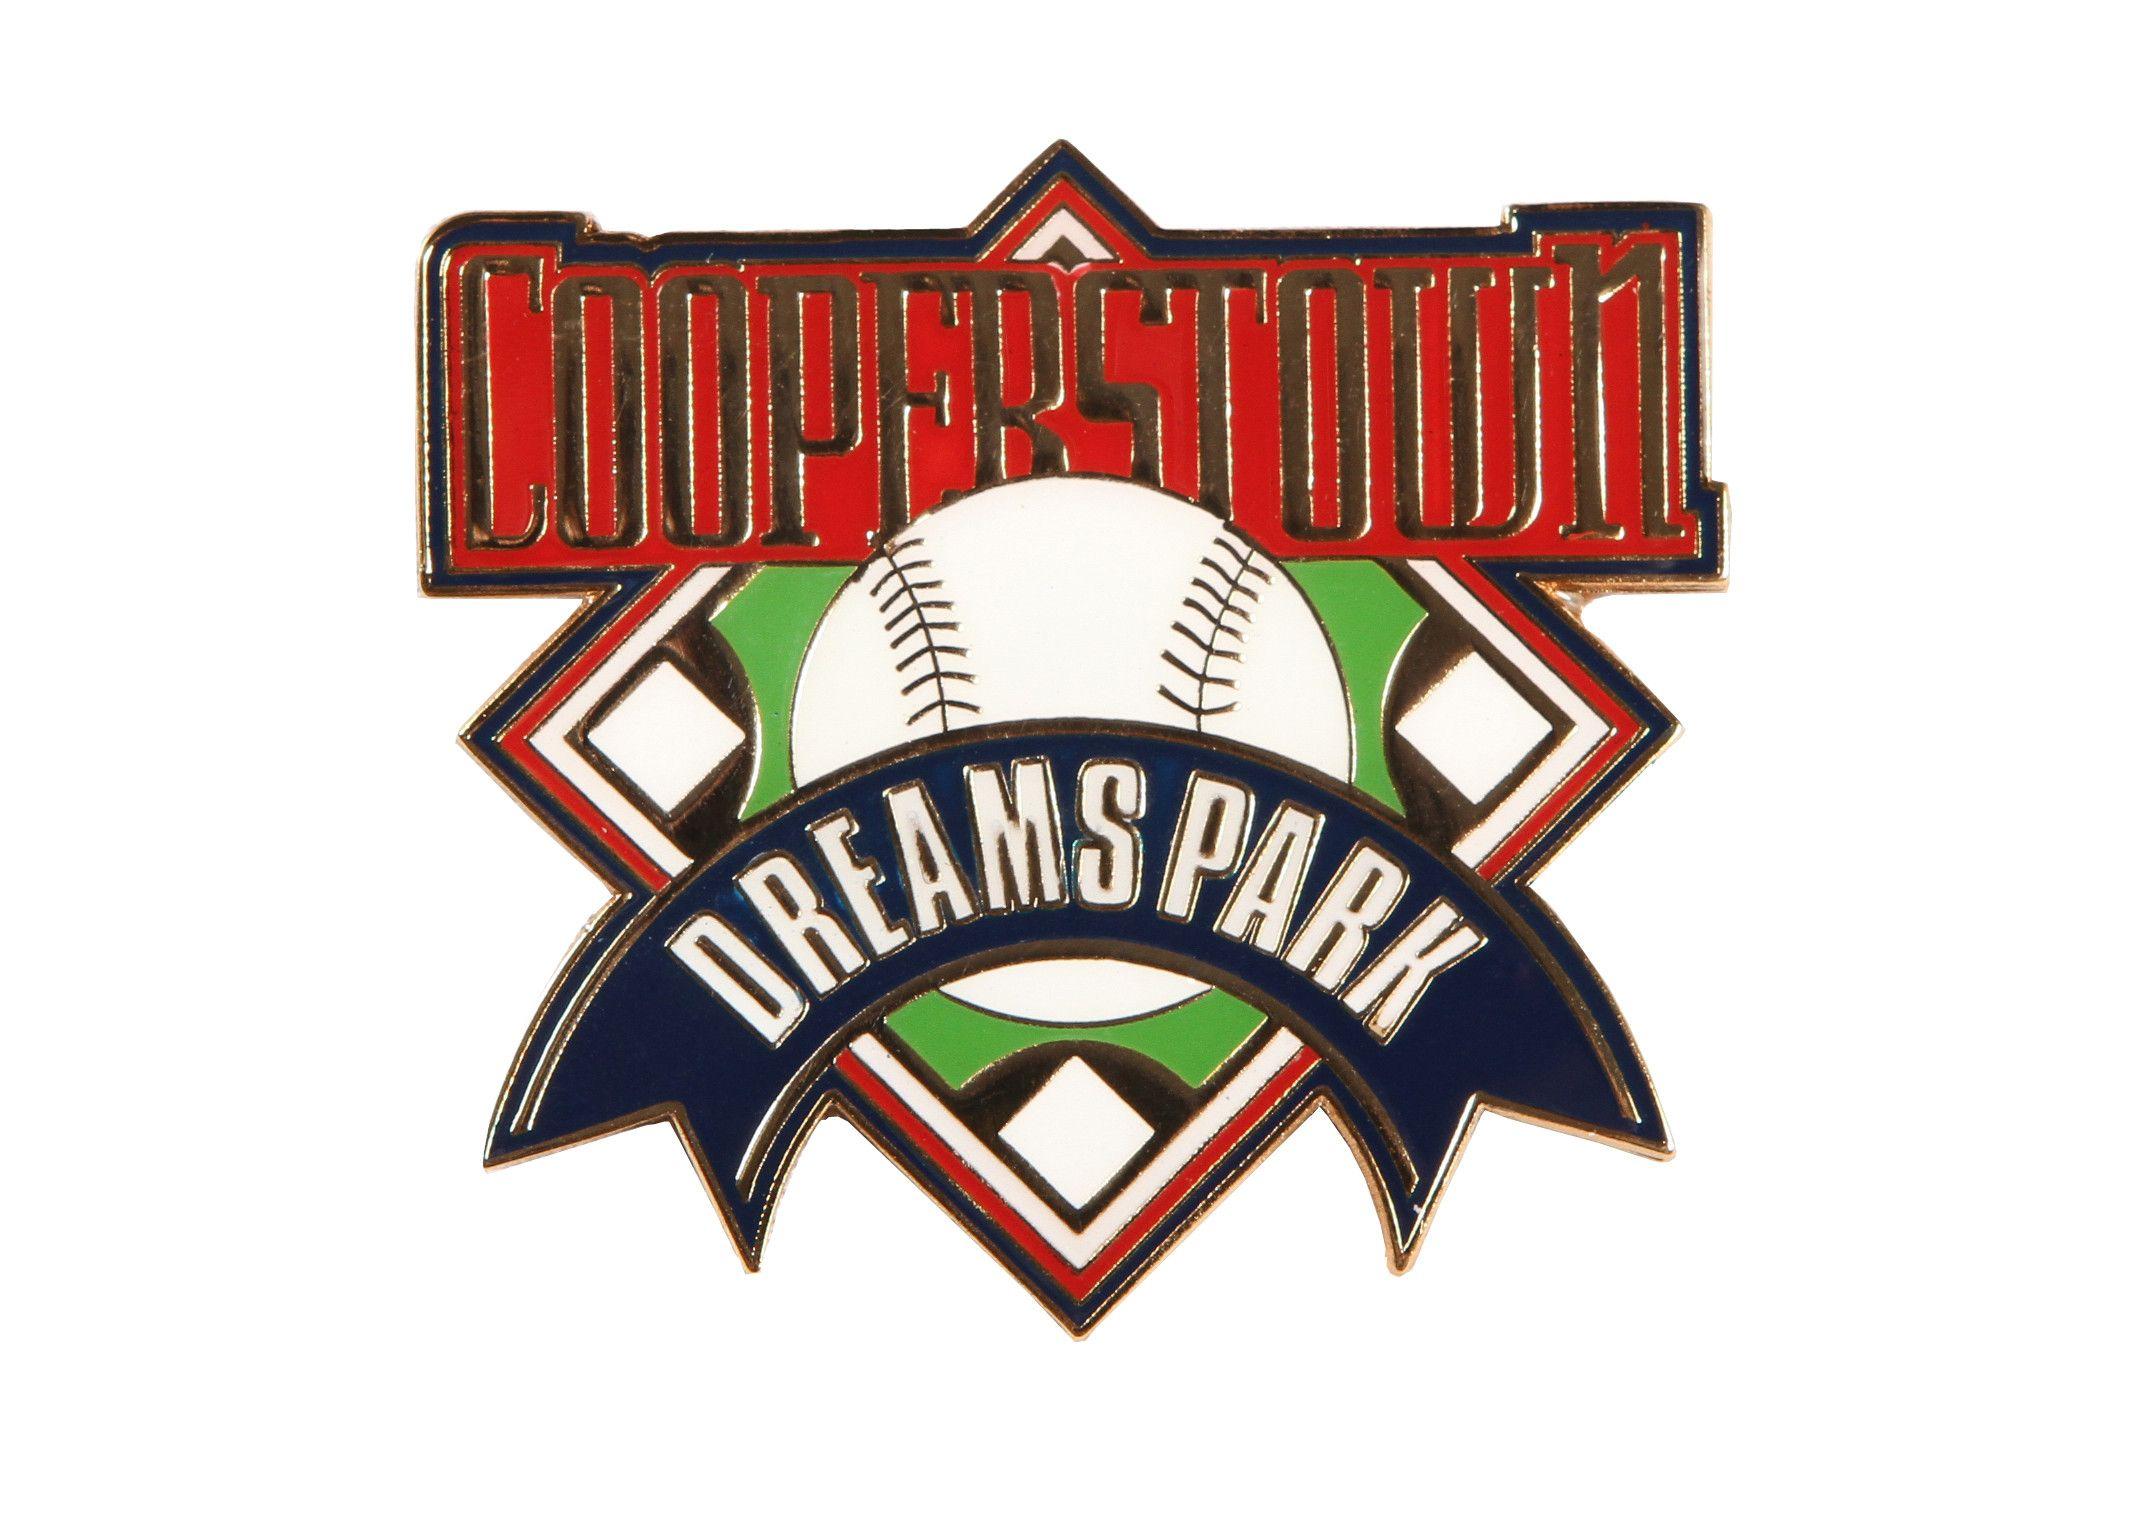 Cooperstown Logo - COOPERSTOWN DREAMS PARK LOGO PIN